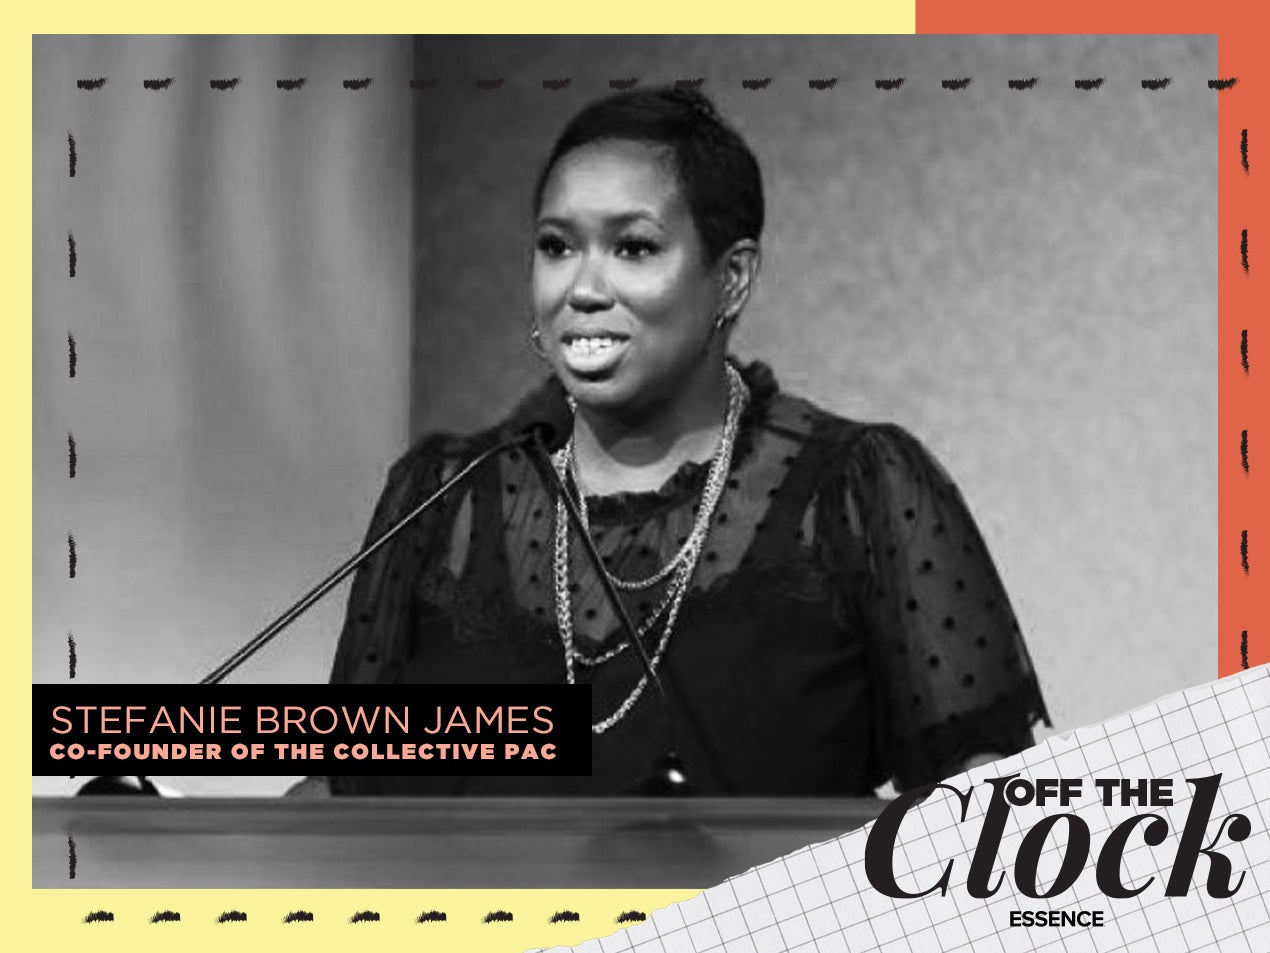 Off the Clock With Stefanie Brown James, Co-Founder Of The Collective PAC